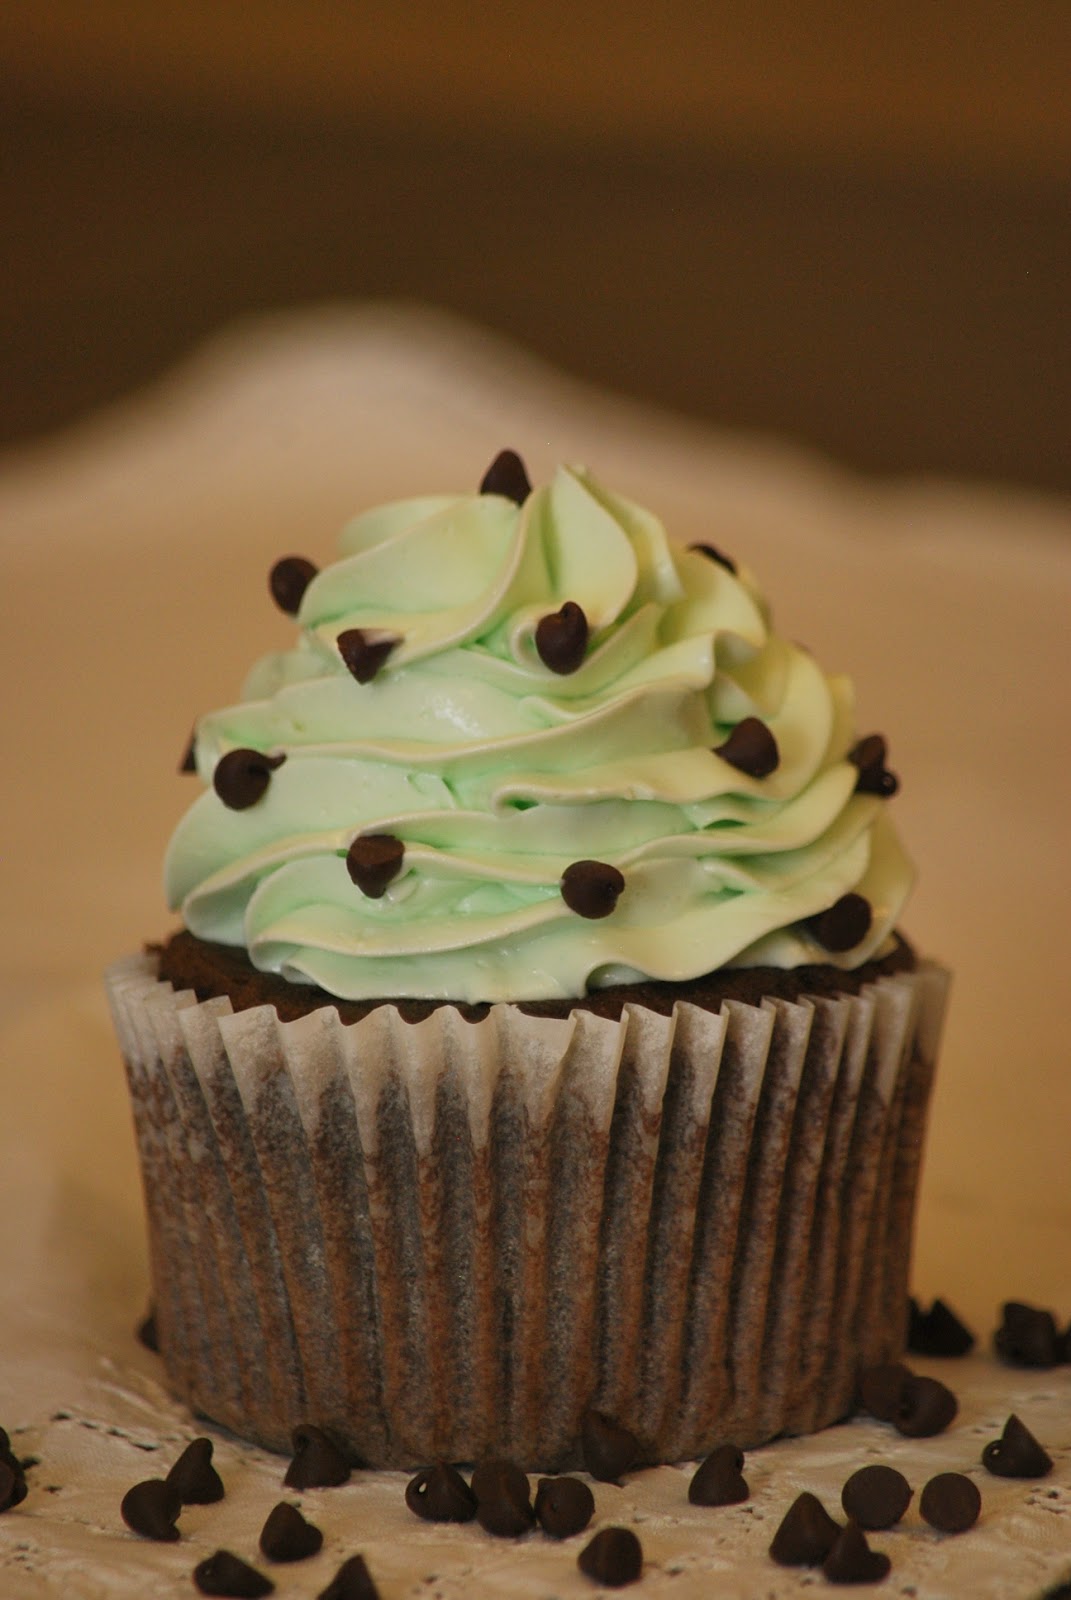 My story in recipes: Chocolate Mint Cupcakes